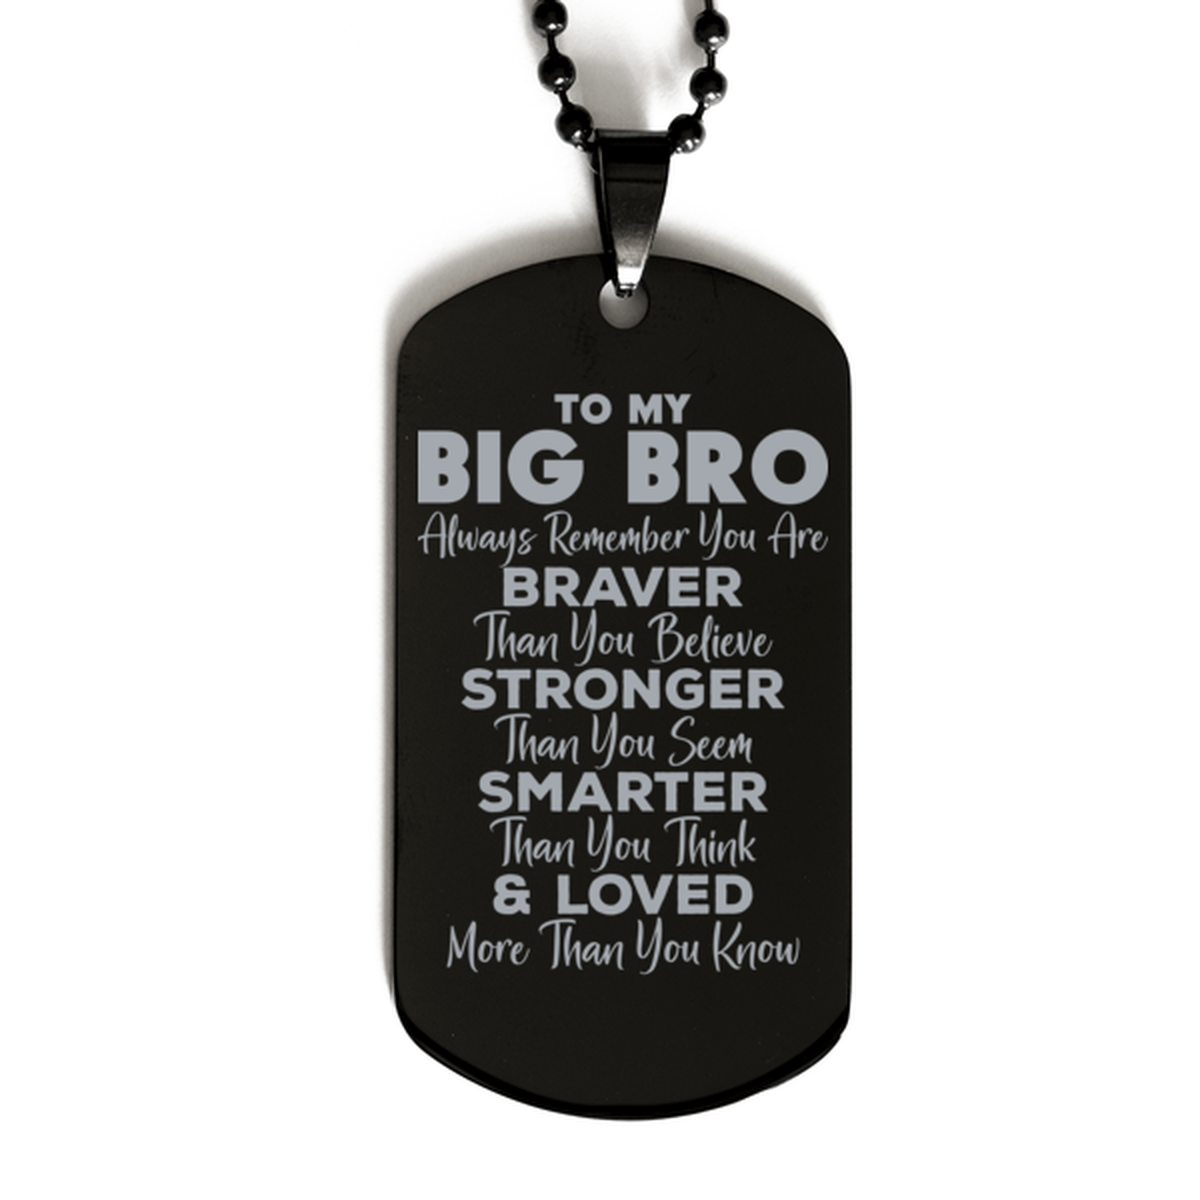 Motivational Big Bro Black Dog Tag Necklace, Big Bro Always Remember You Are Braver Than You Believe, Best Birthday Gifts for Big Bro